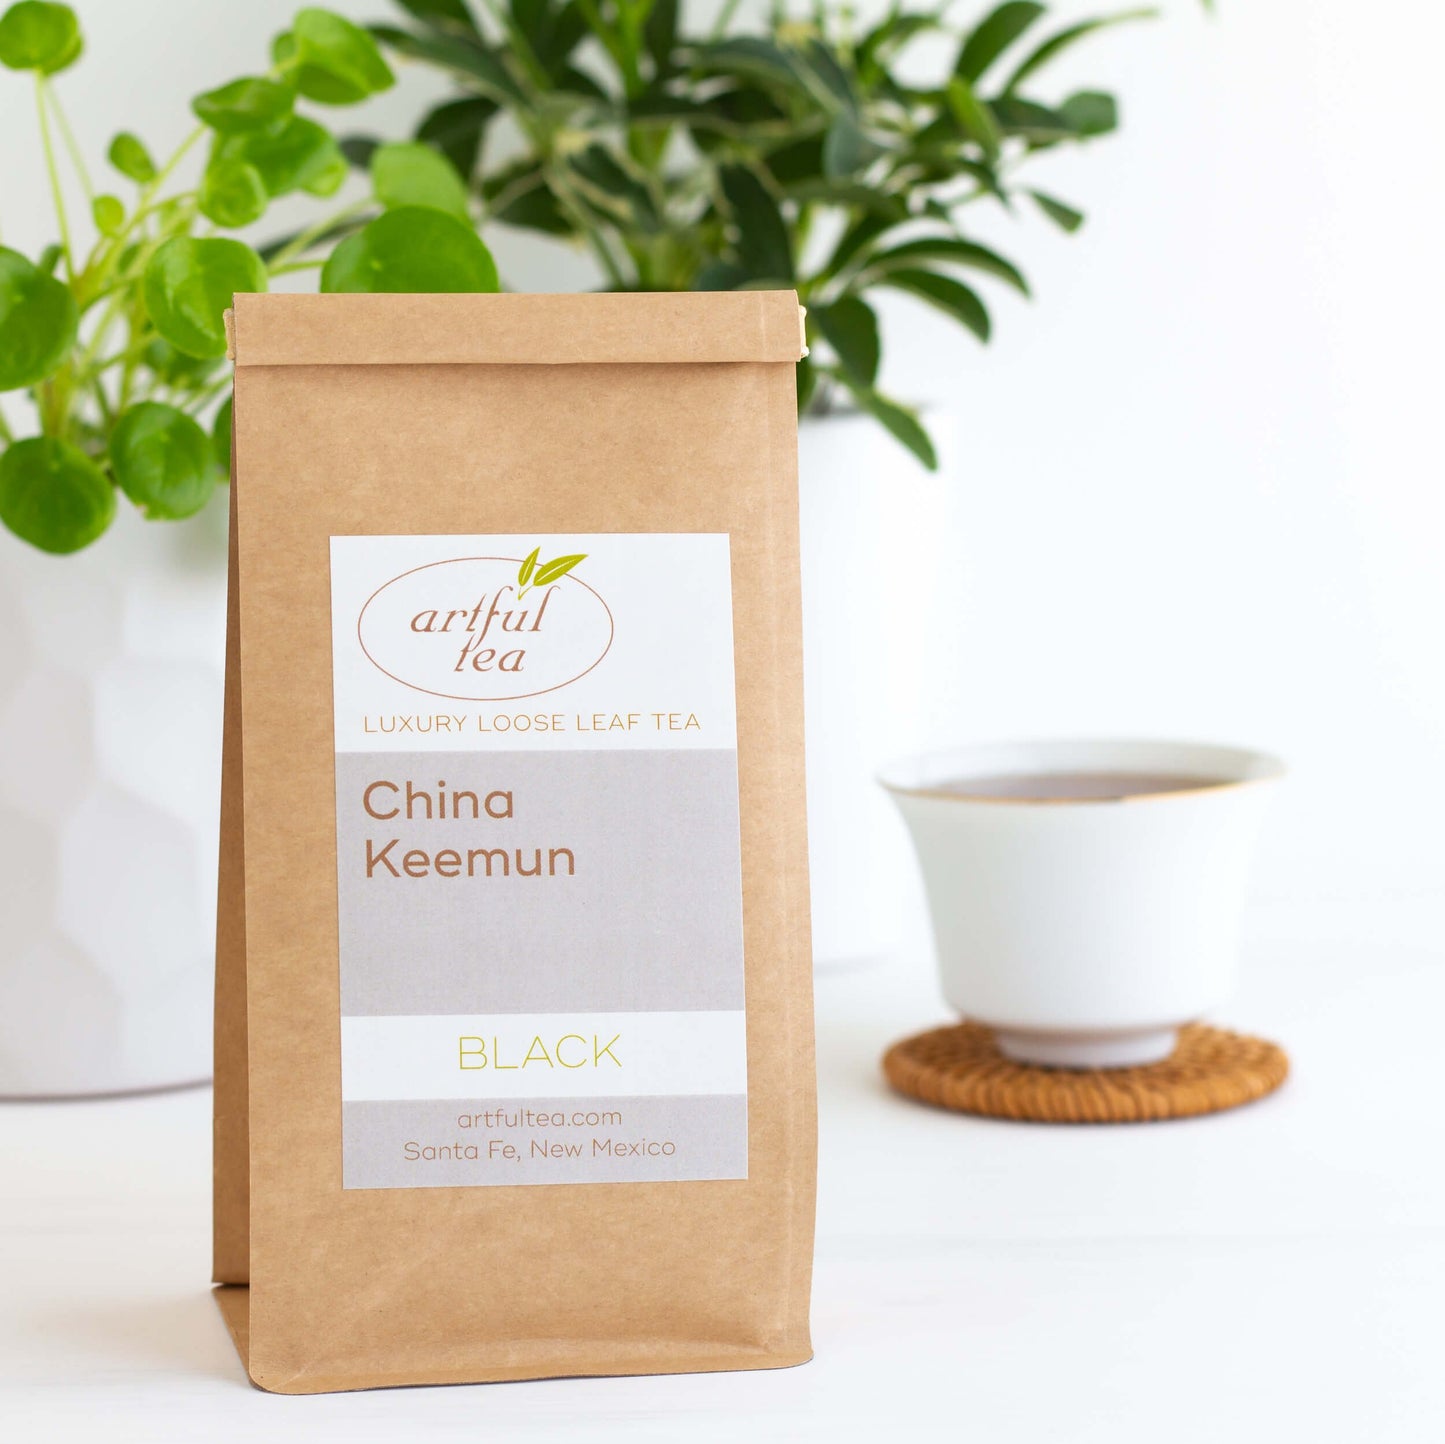 China Keemun Black Tea shown packaged in a kraft bag, with white cup and green plants in the background